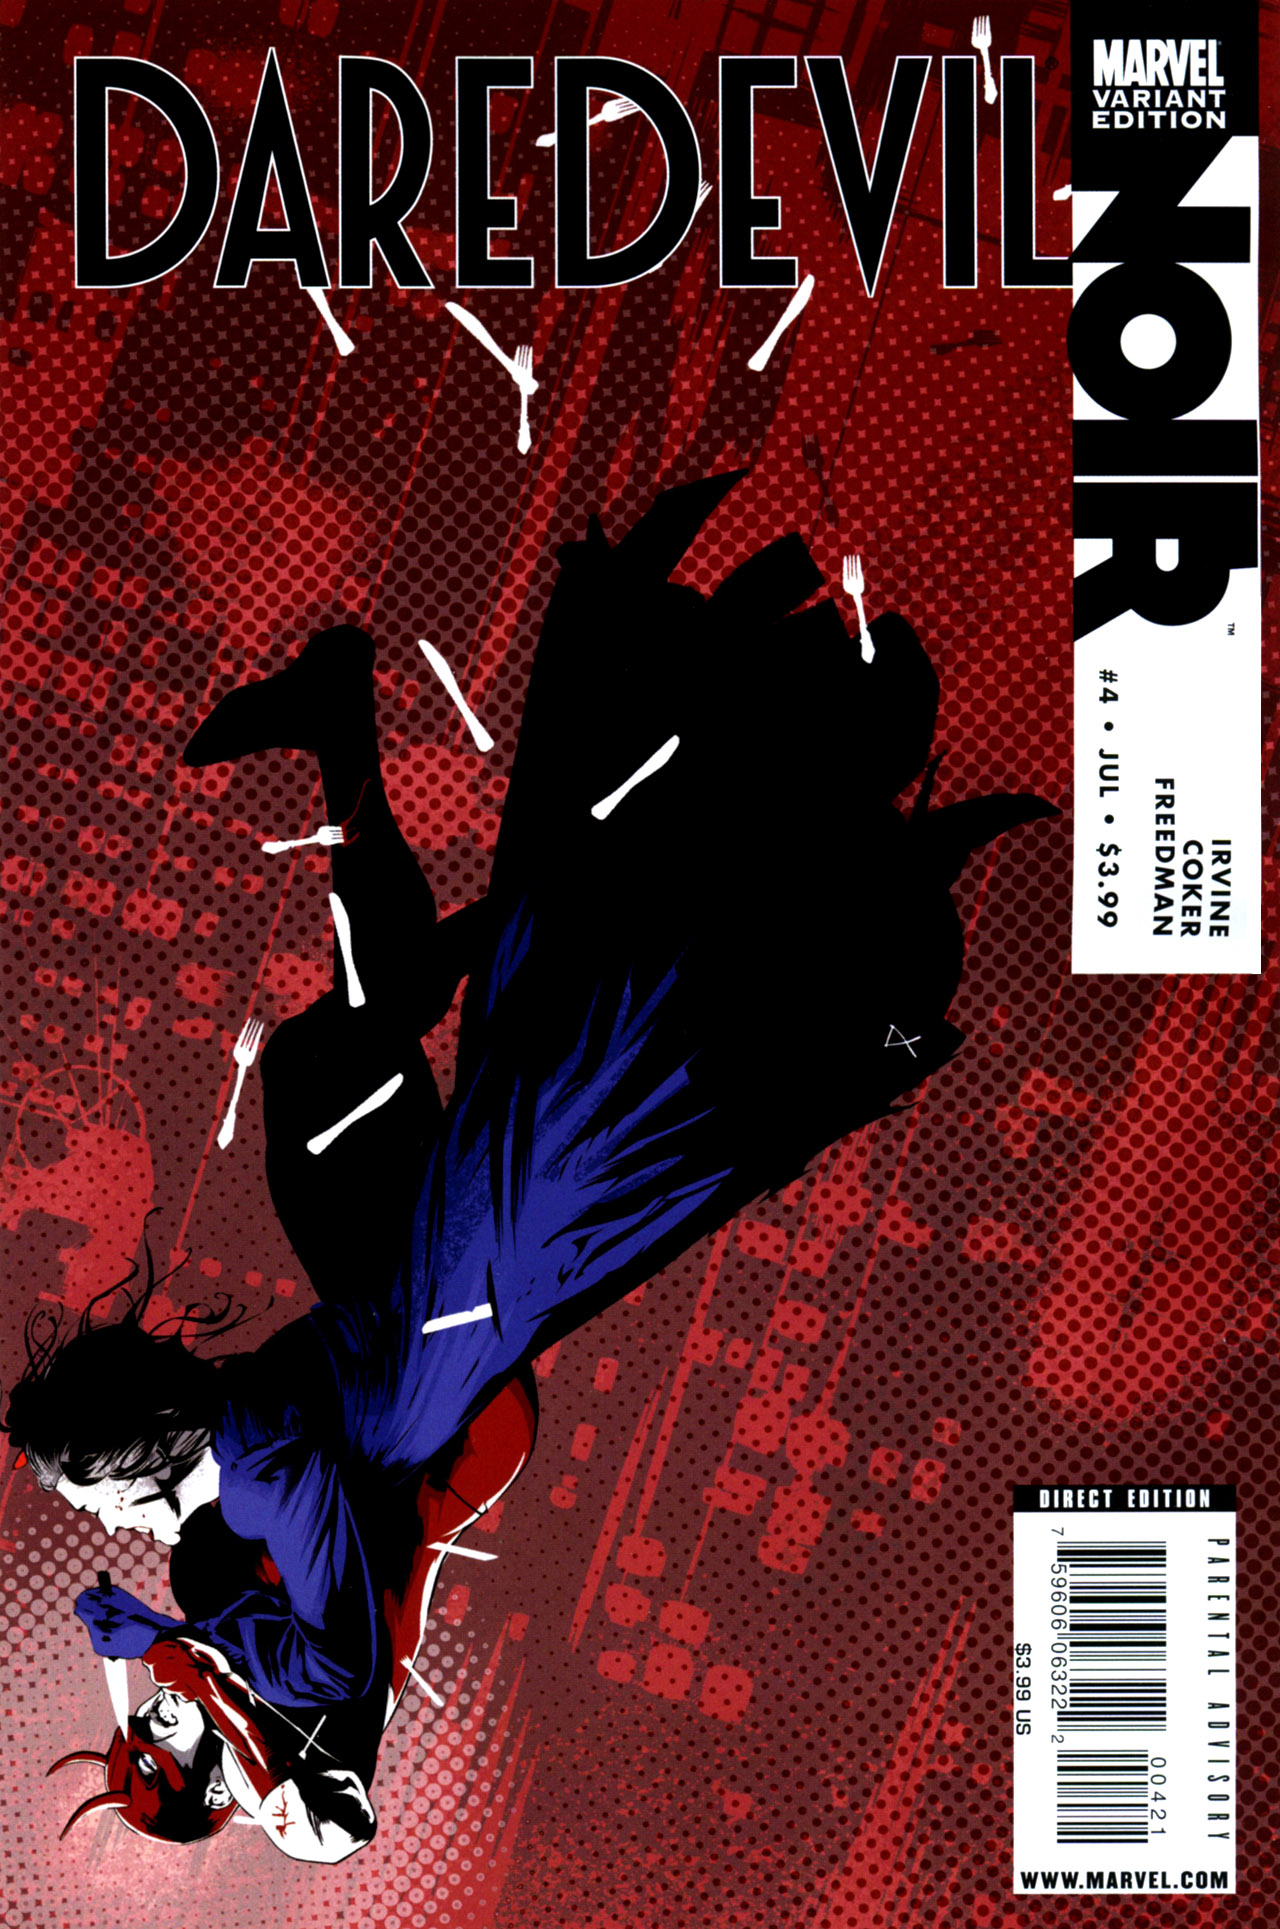 Variant Cover